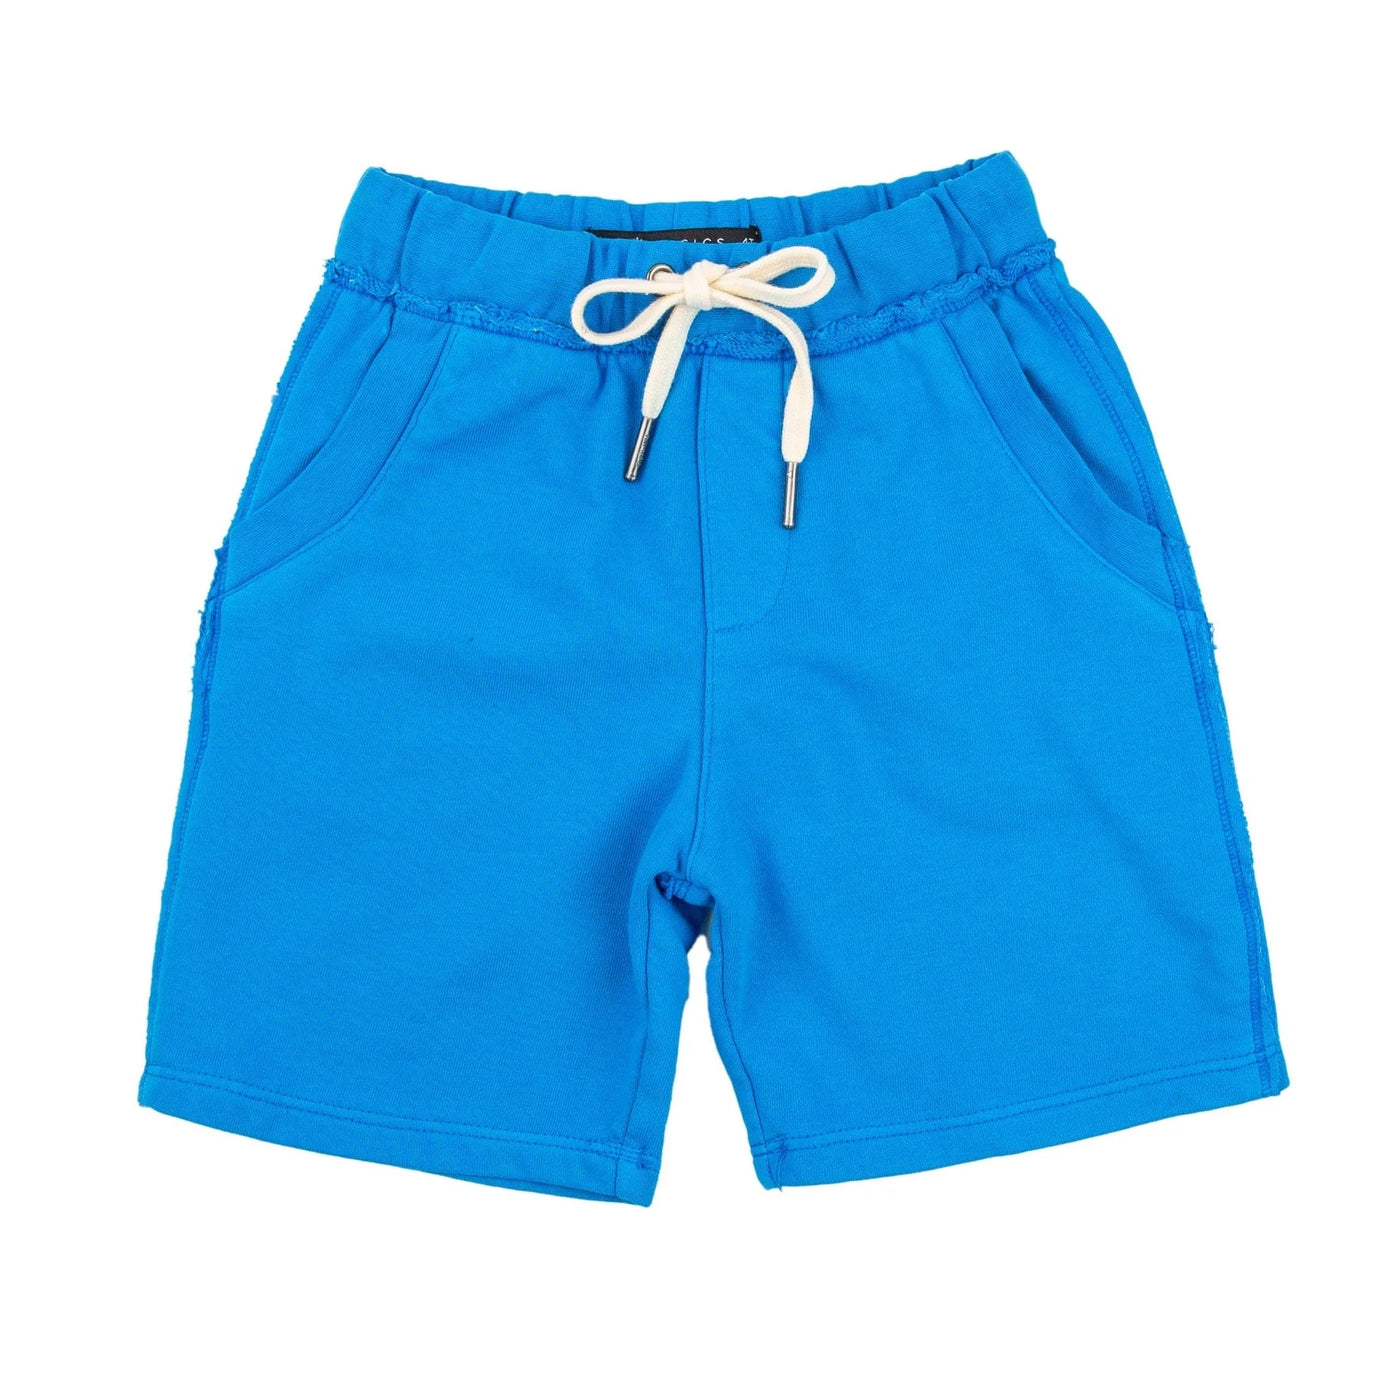 Miki Miette Rusty Short + More Options